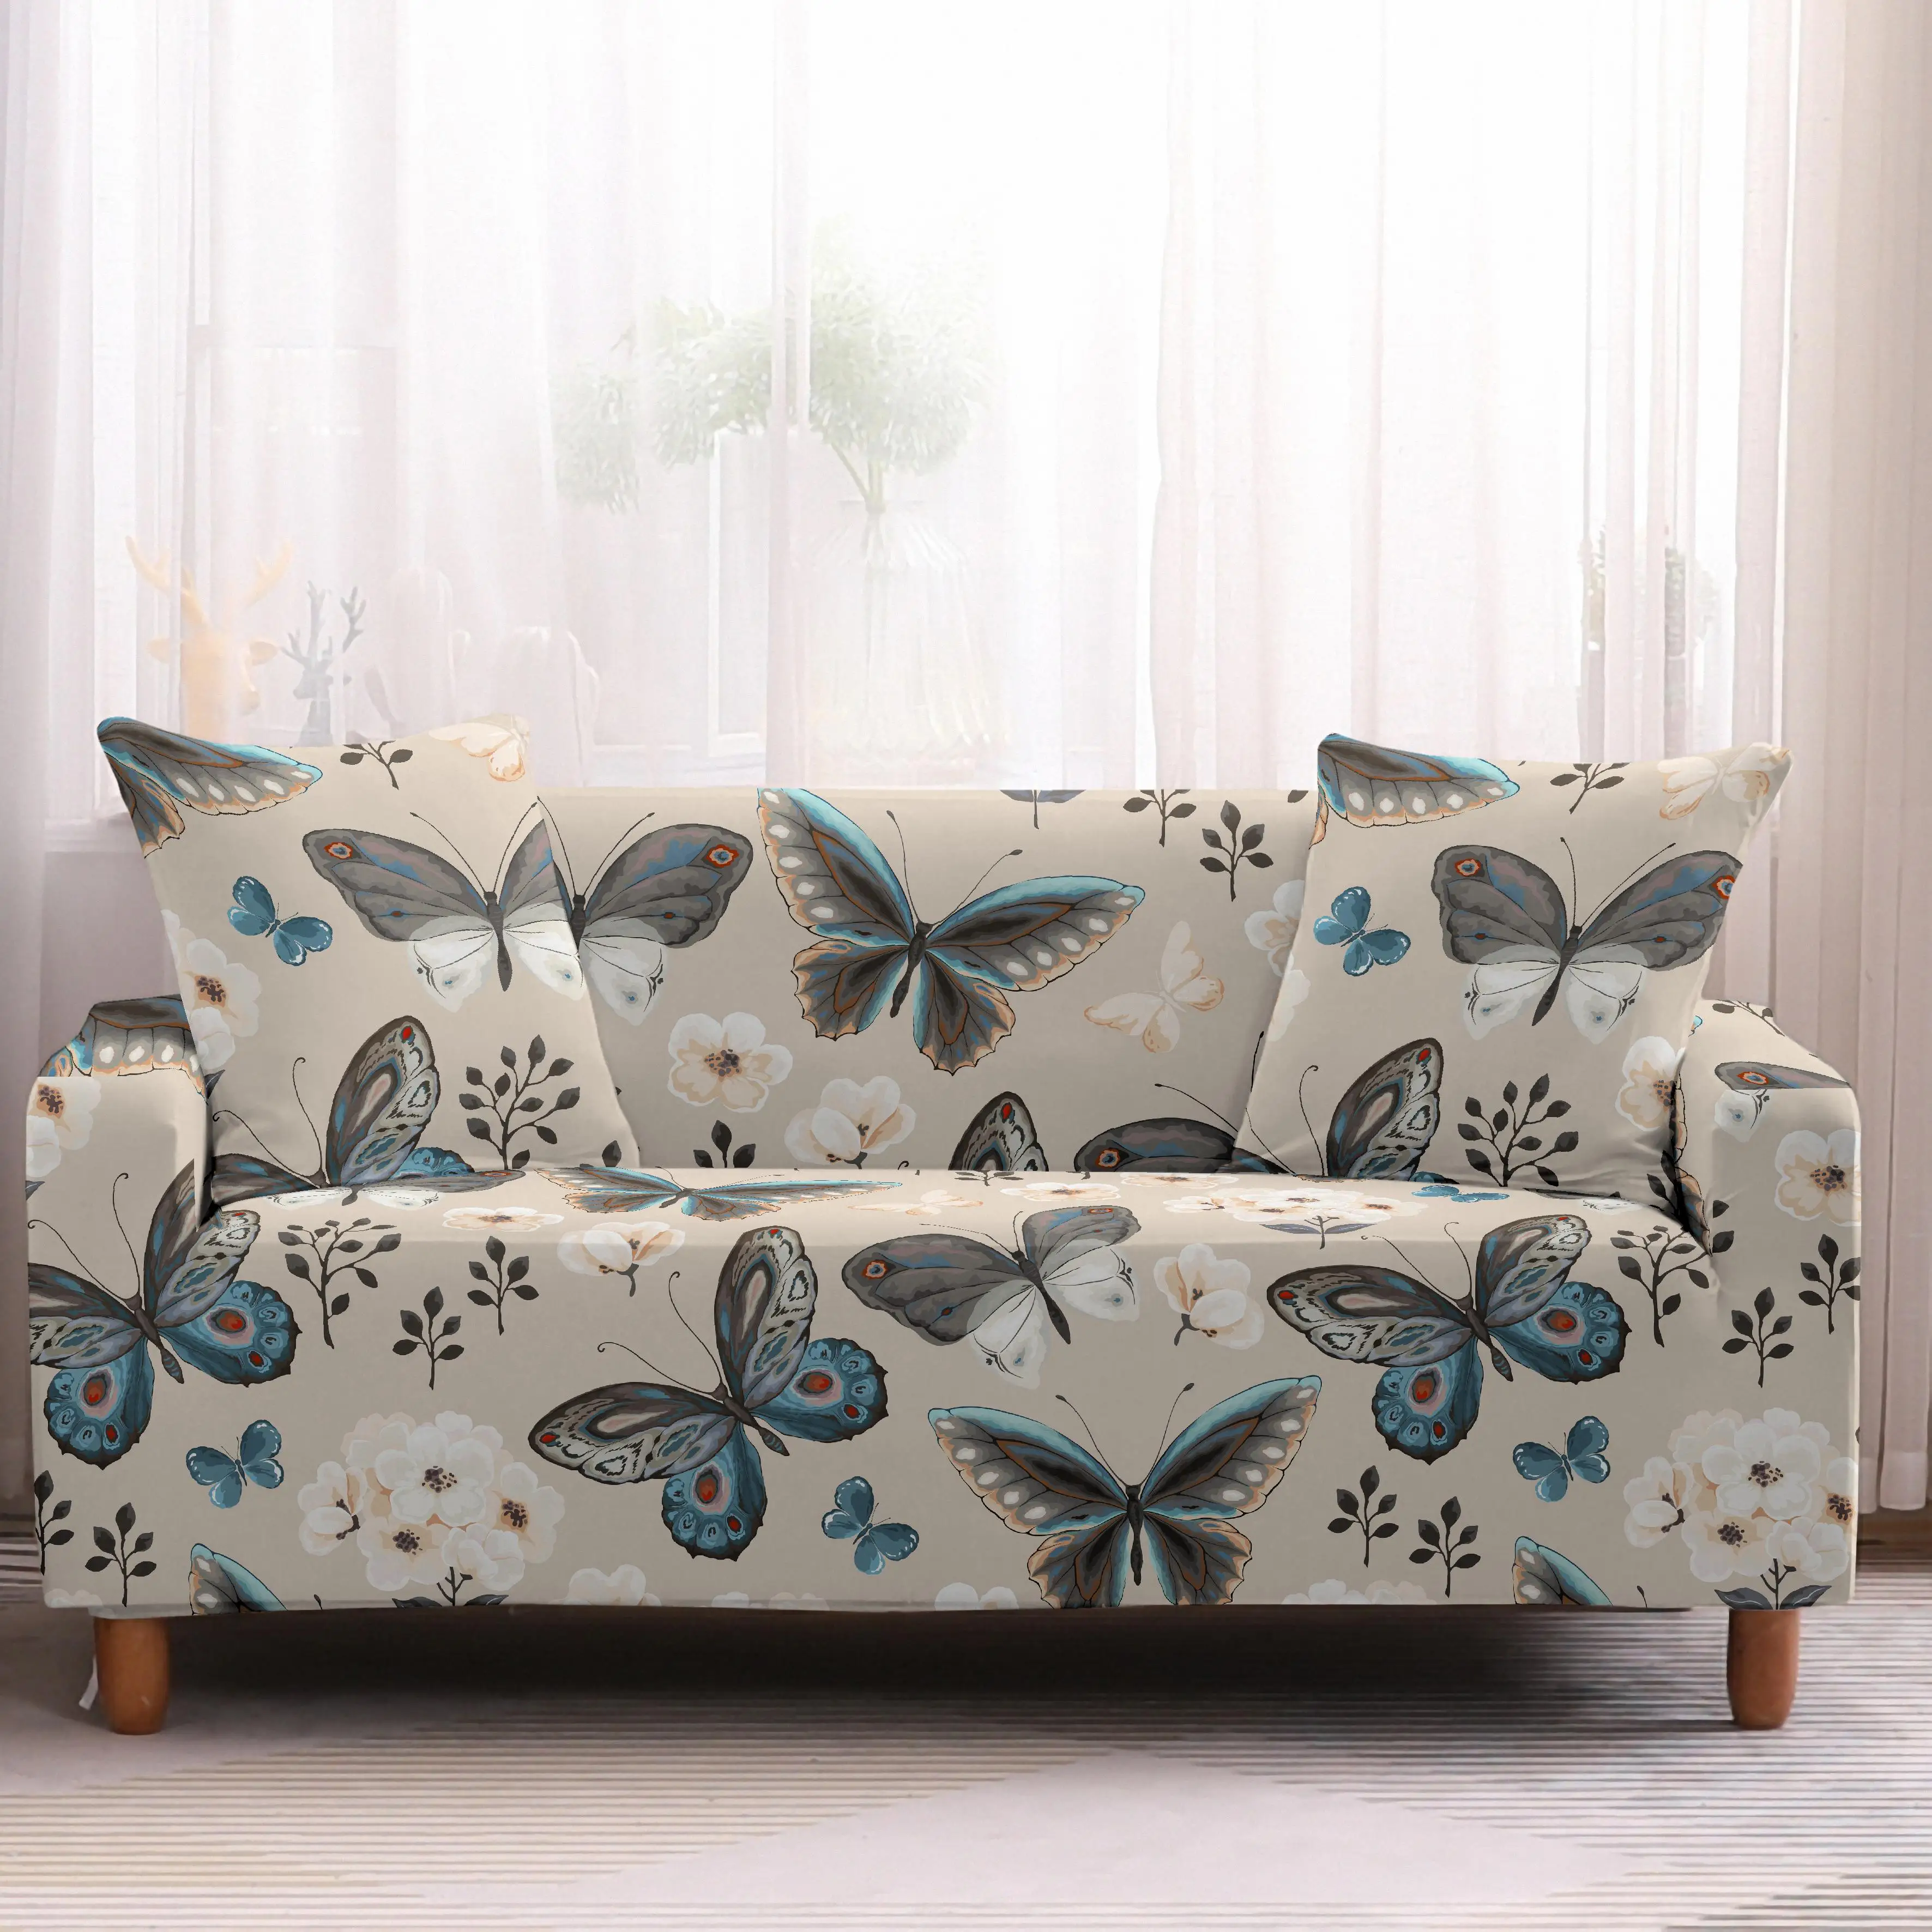 Details about   Plaid Flower Printed Sofa Cover Living Room All-inclusive Elastic Corner cover 